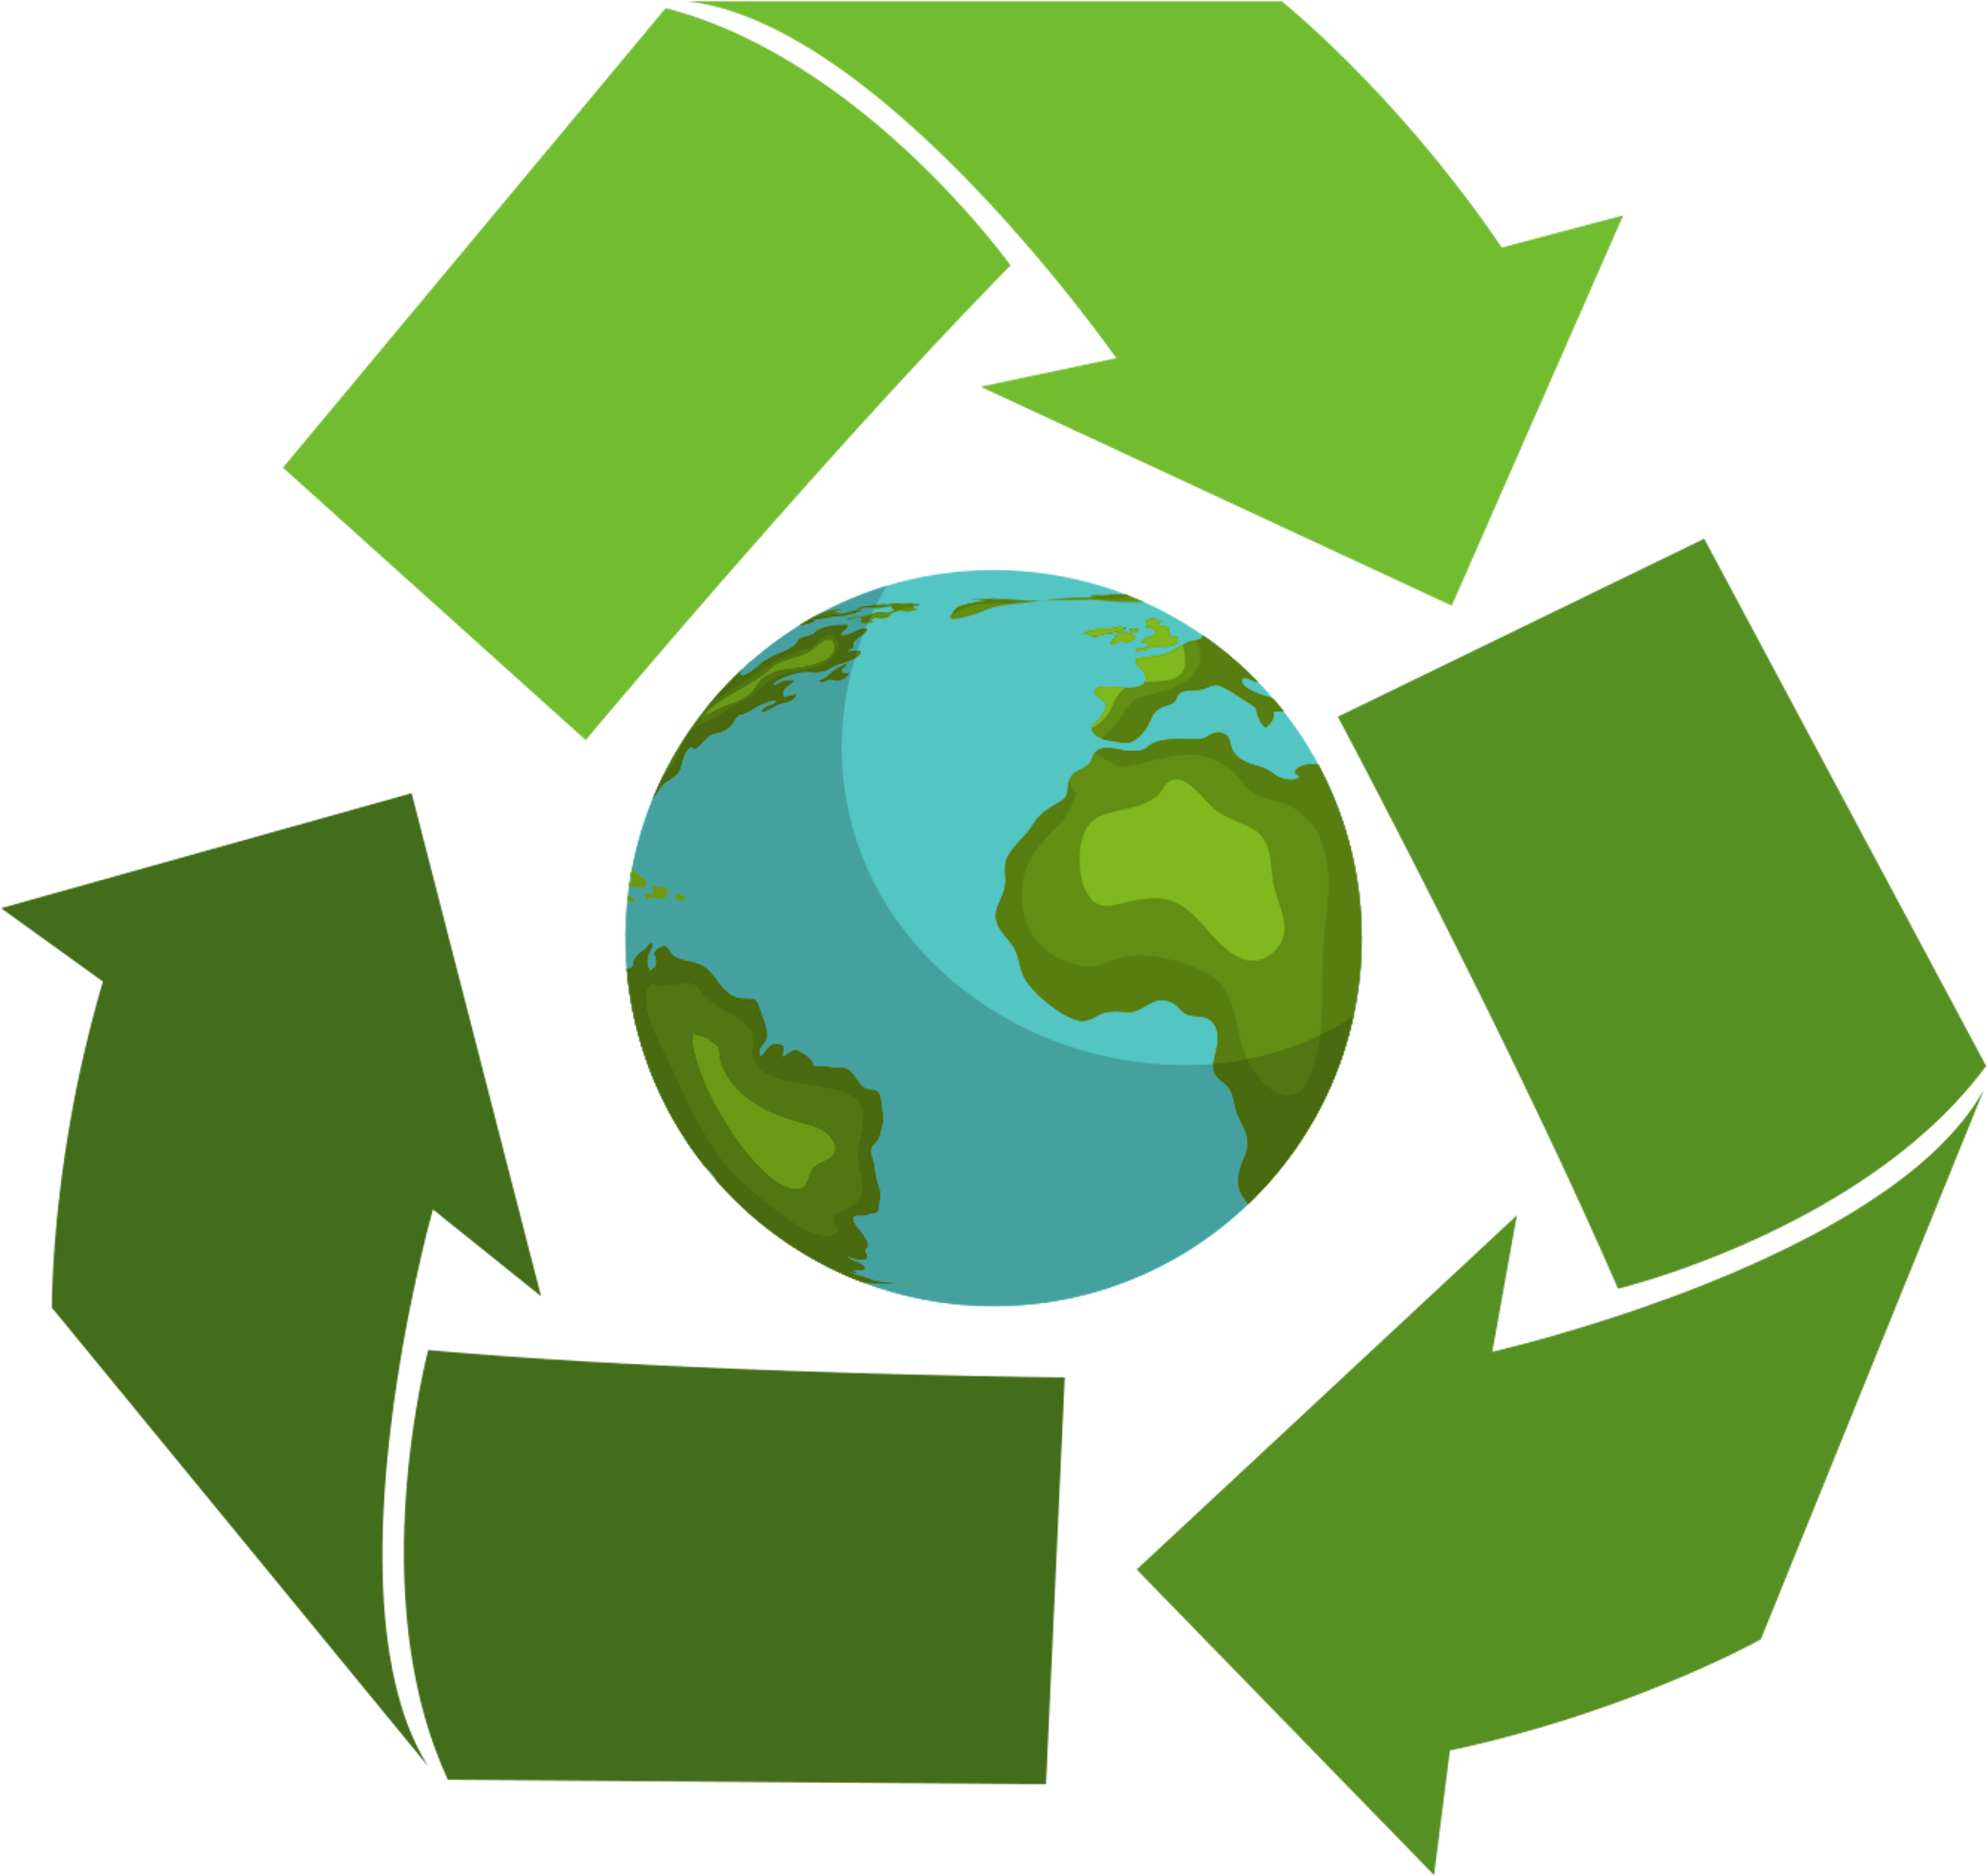 A Green Recycle Symbol With A Planet Earth